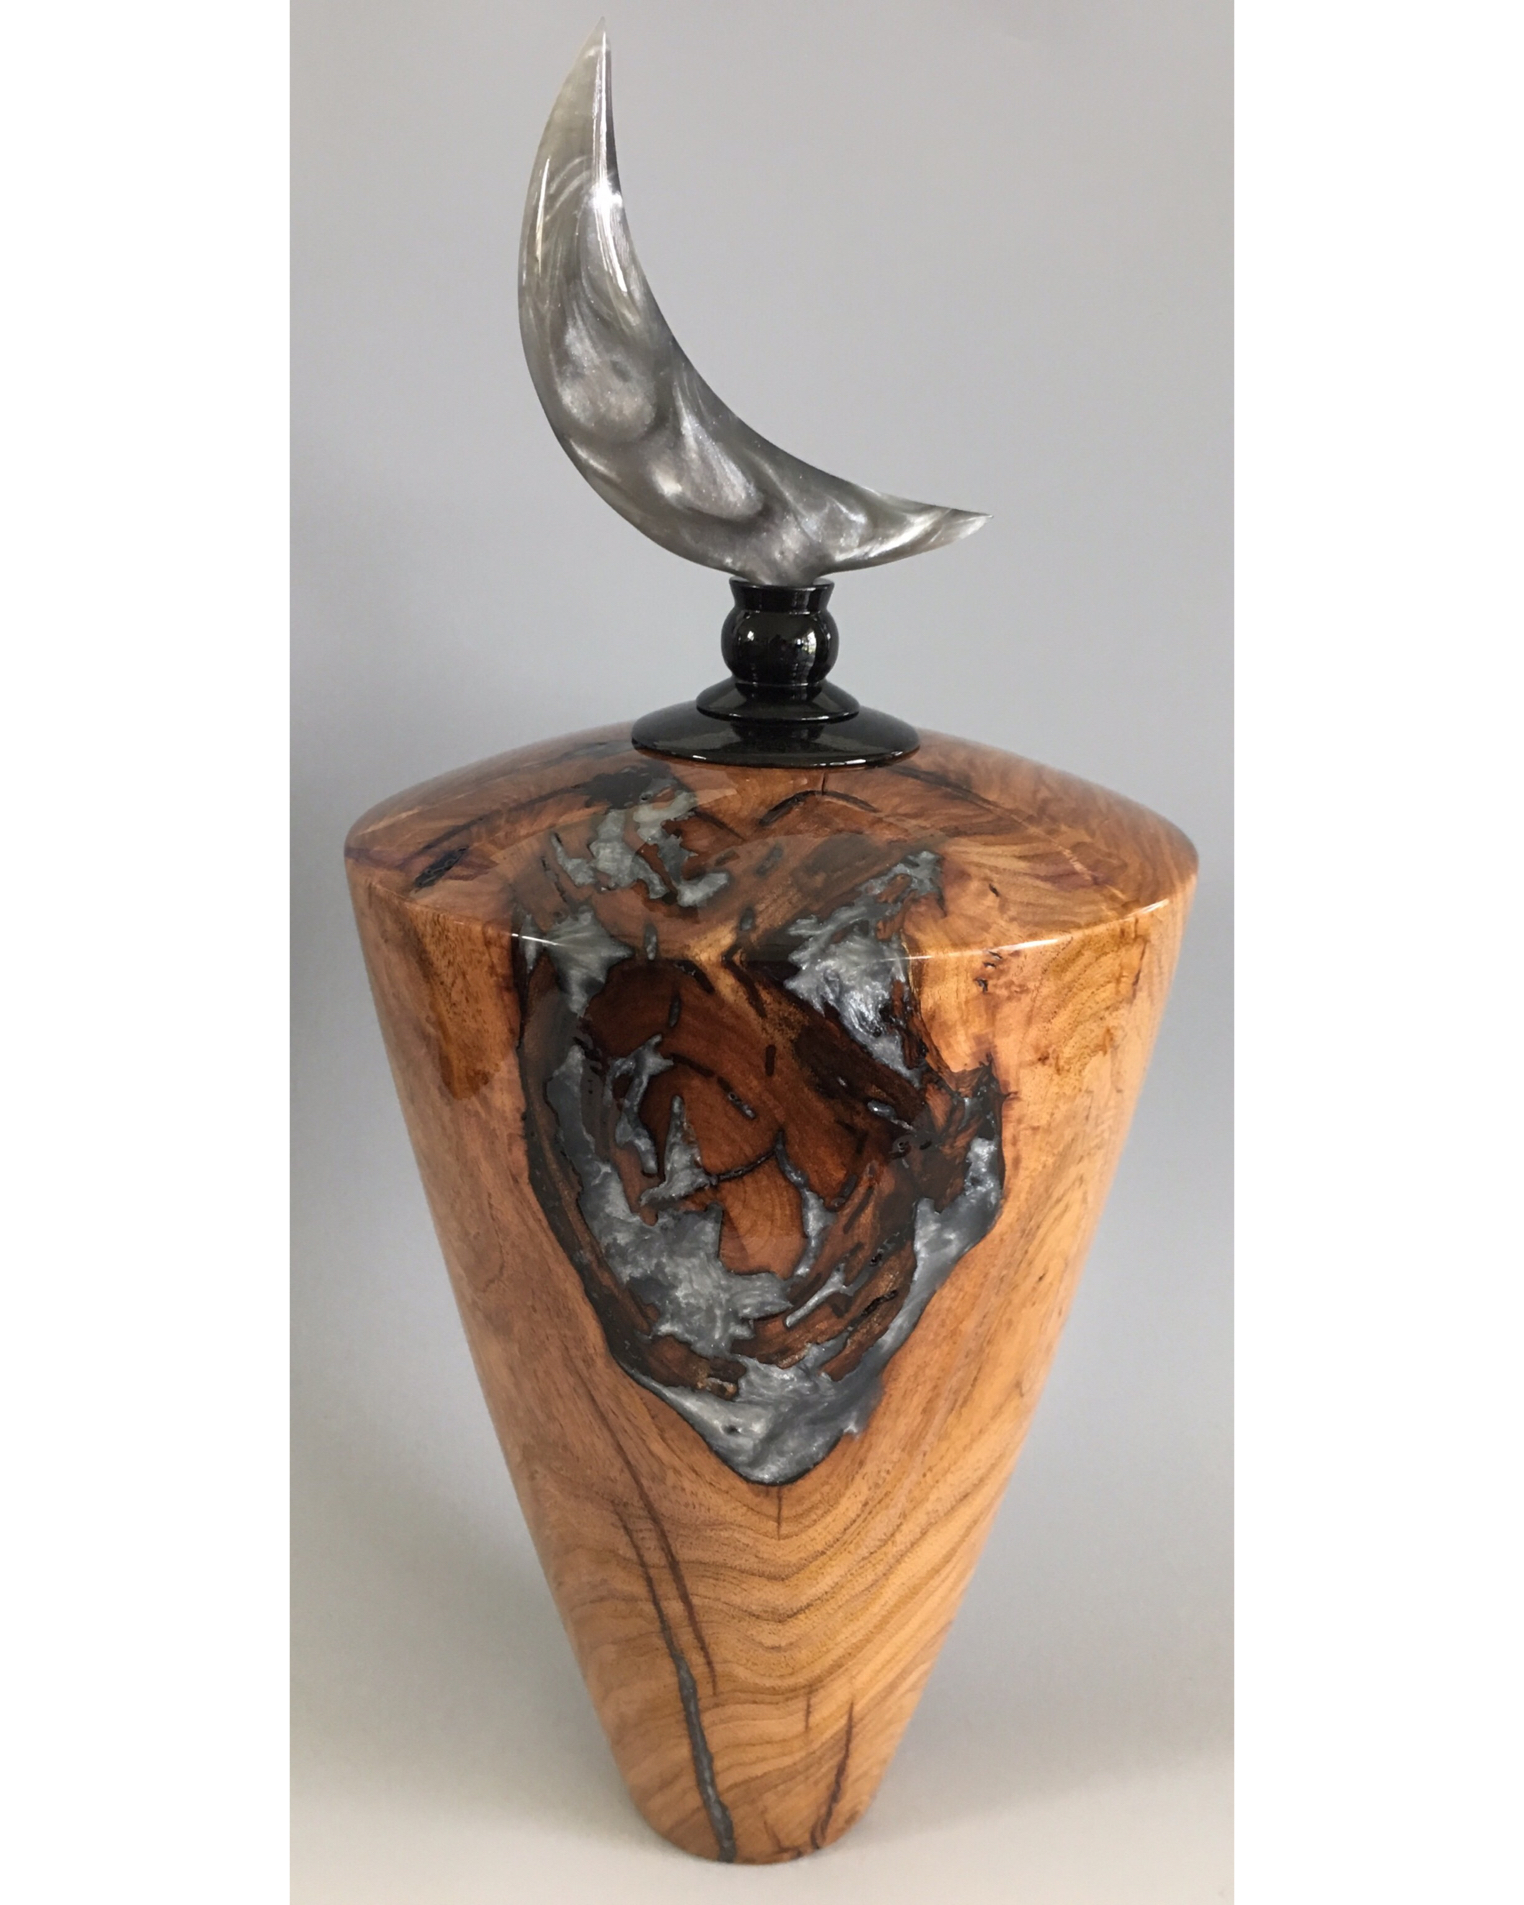 Mesquite hollow vessel with colored resin inlay and crescent moon finial